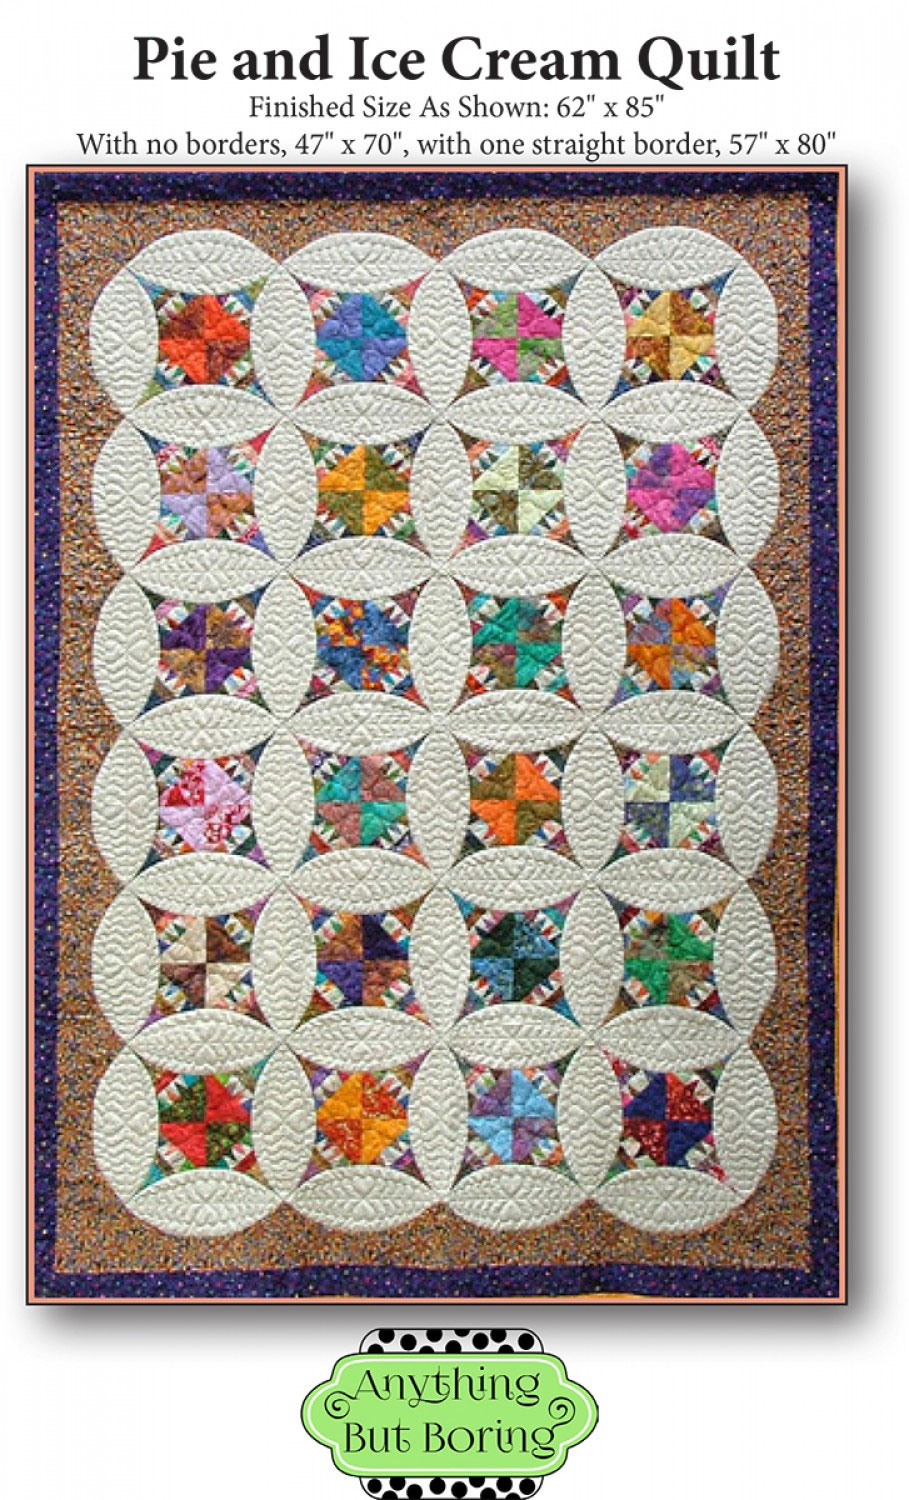 Pie-and-Ice-Cream-quilt-sewing-pattern-Anything-But-Boring-front